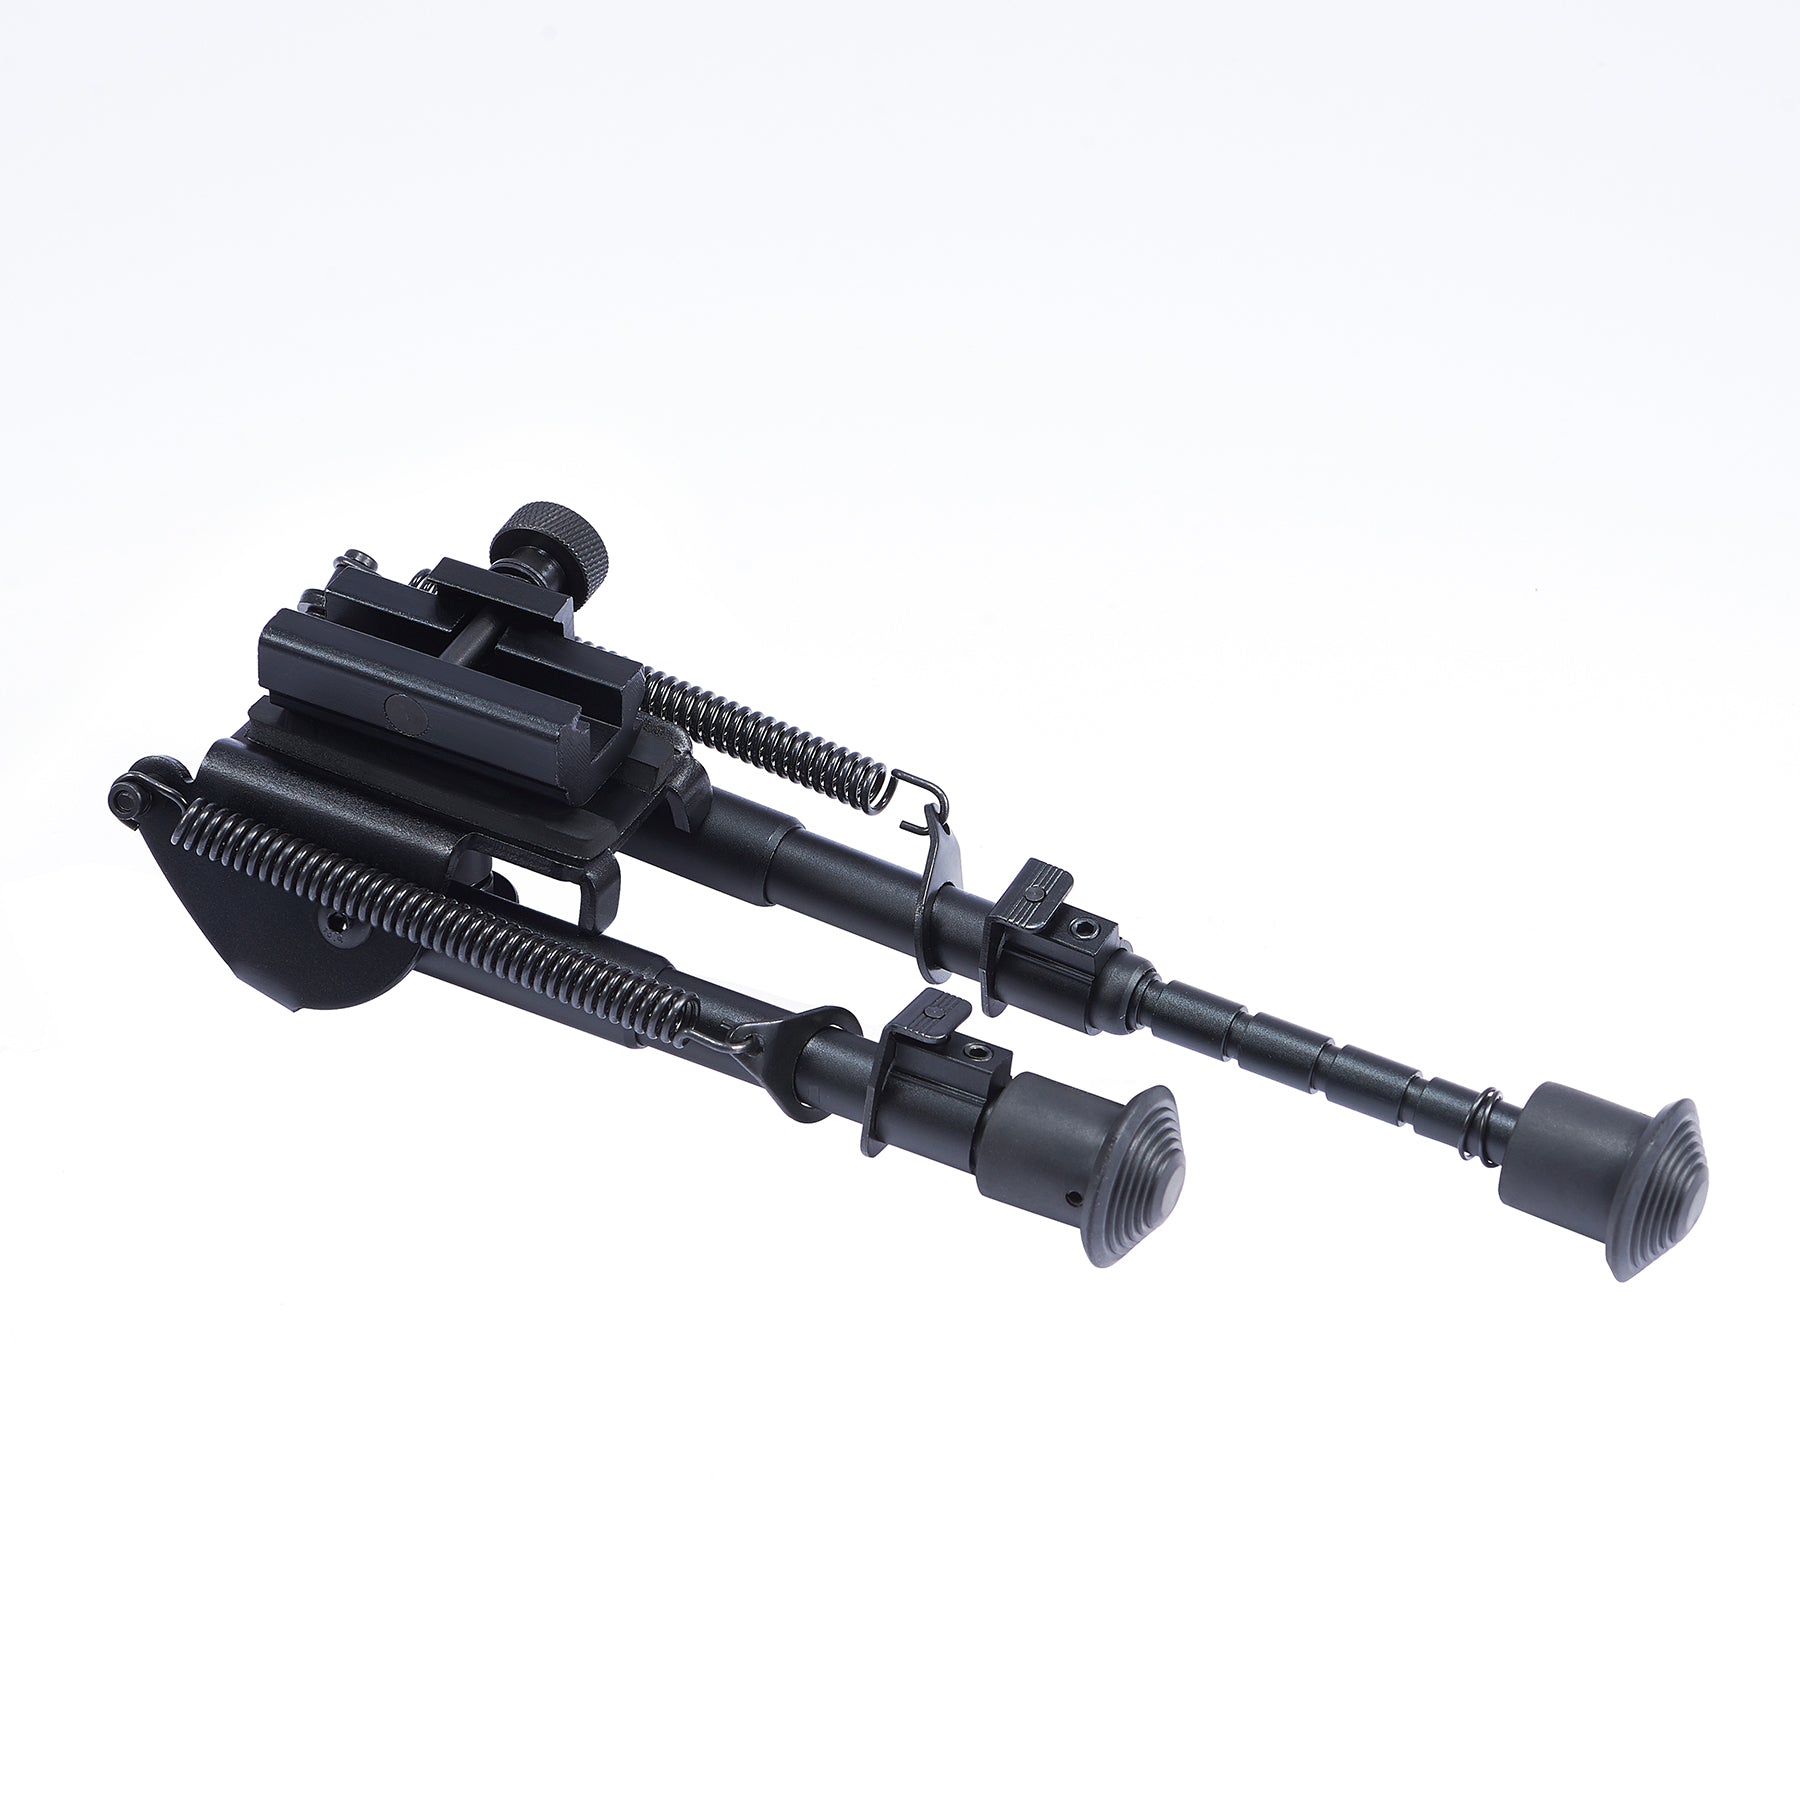 Tactical Rifle Bipod with 6-9 Inch Adjustable Legs and 360 Degree Swivel Adapter